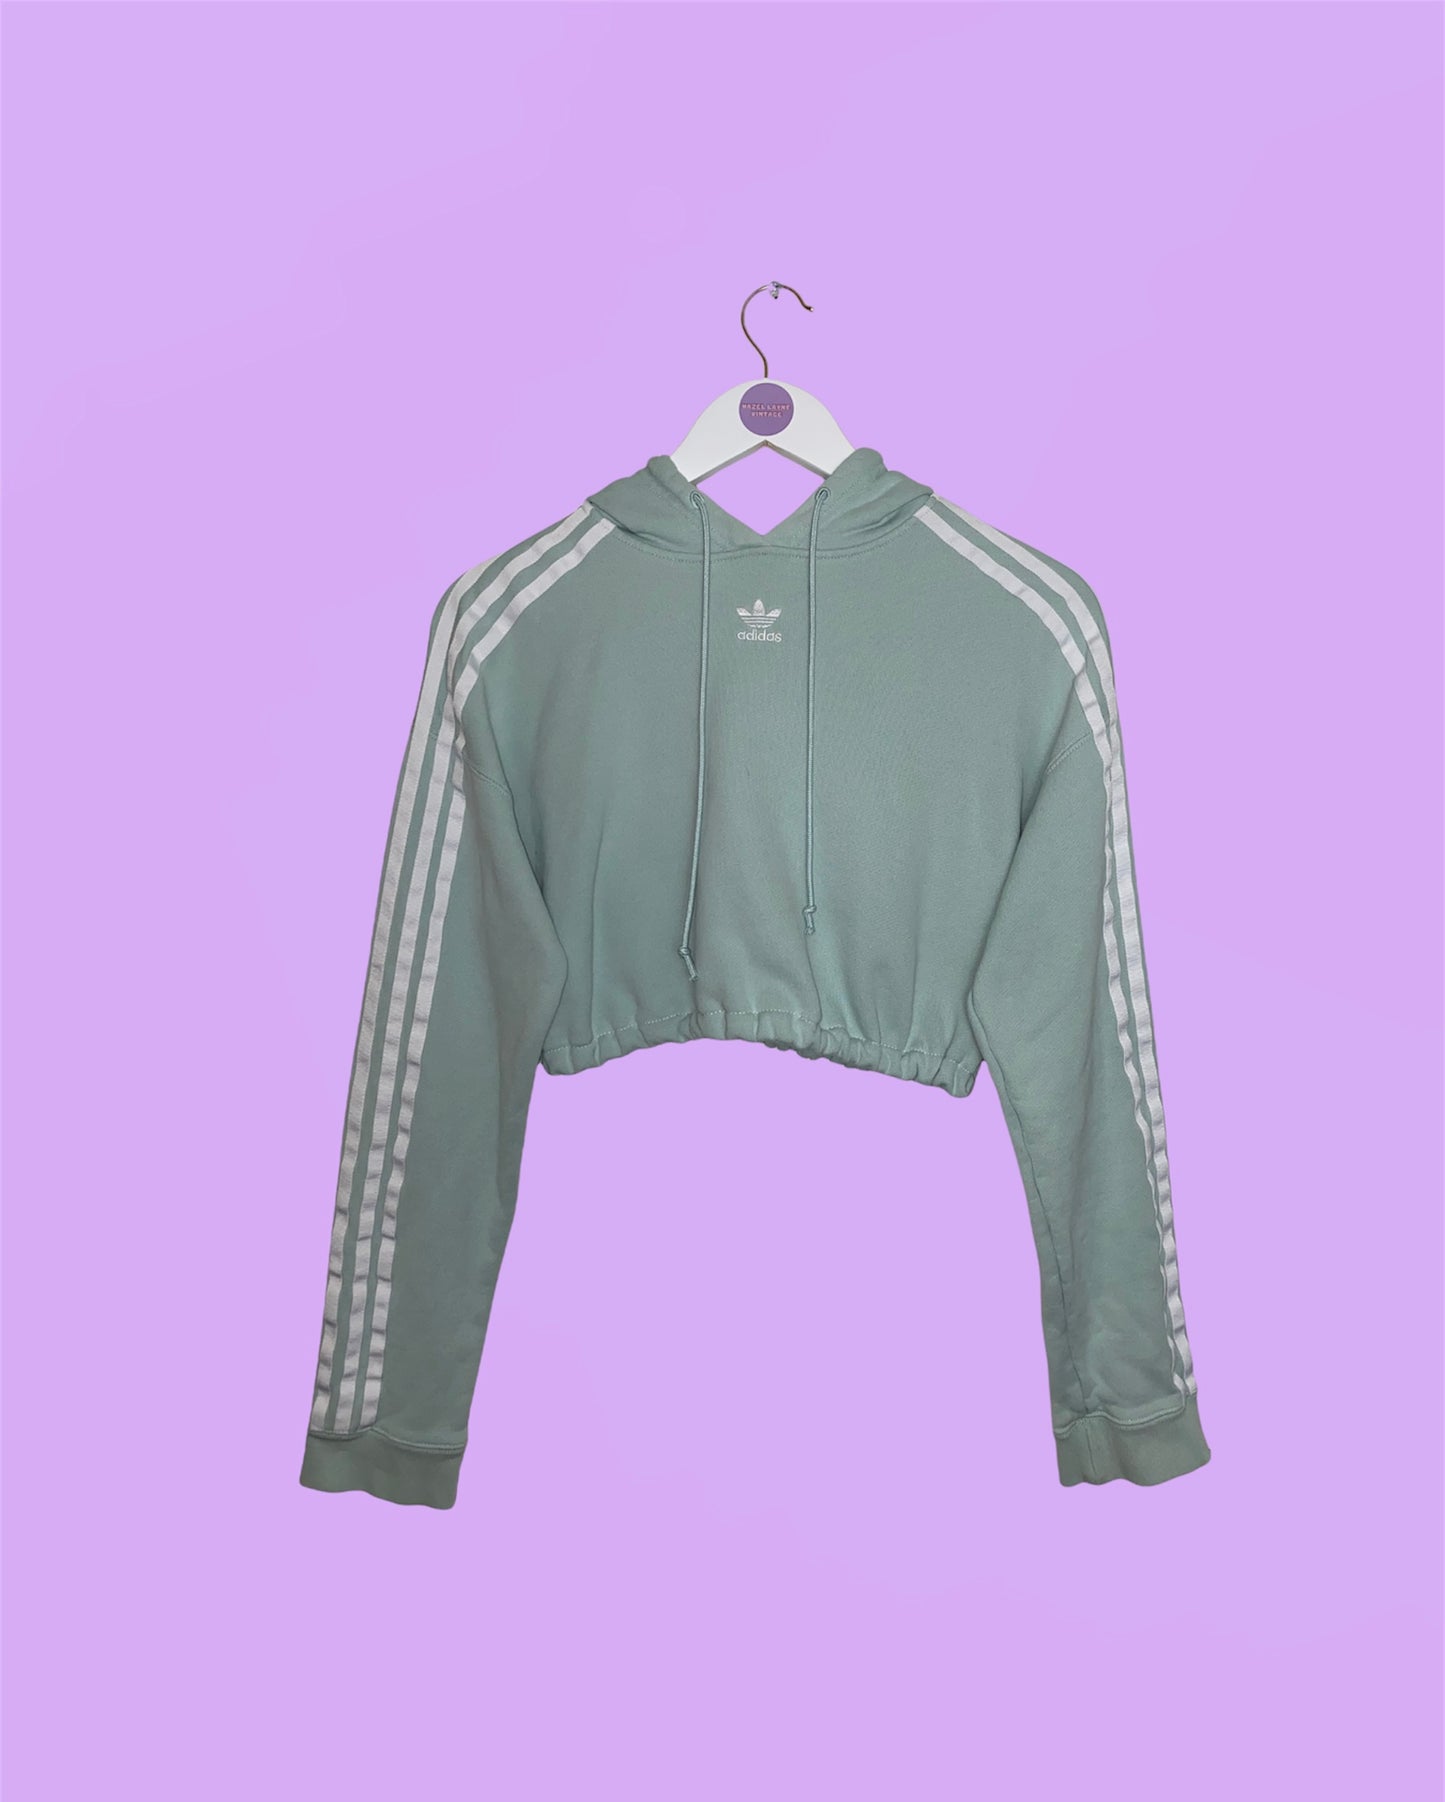 sage green cropped hoodie with white adidas logo and white stripes on sleeves shown on a white clothes hanger on a lilac background